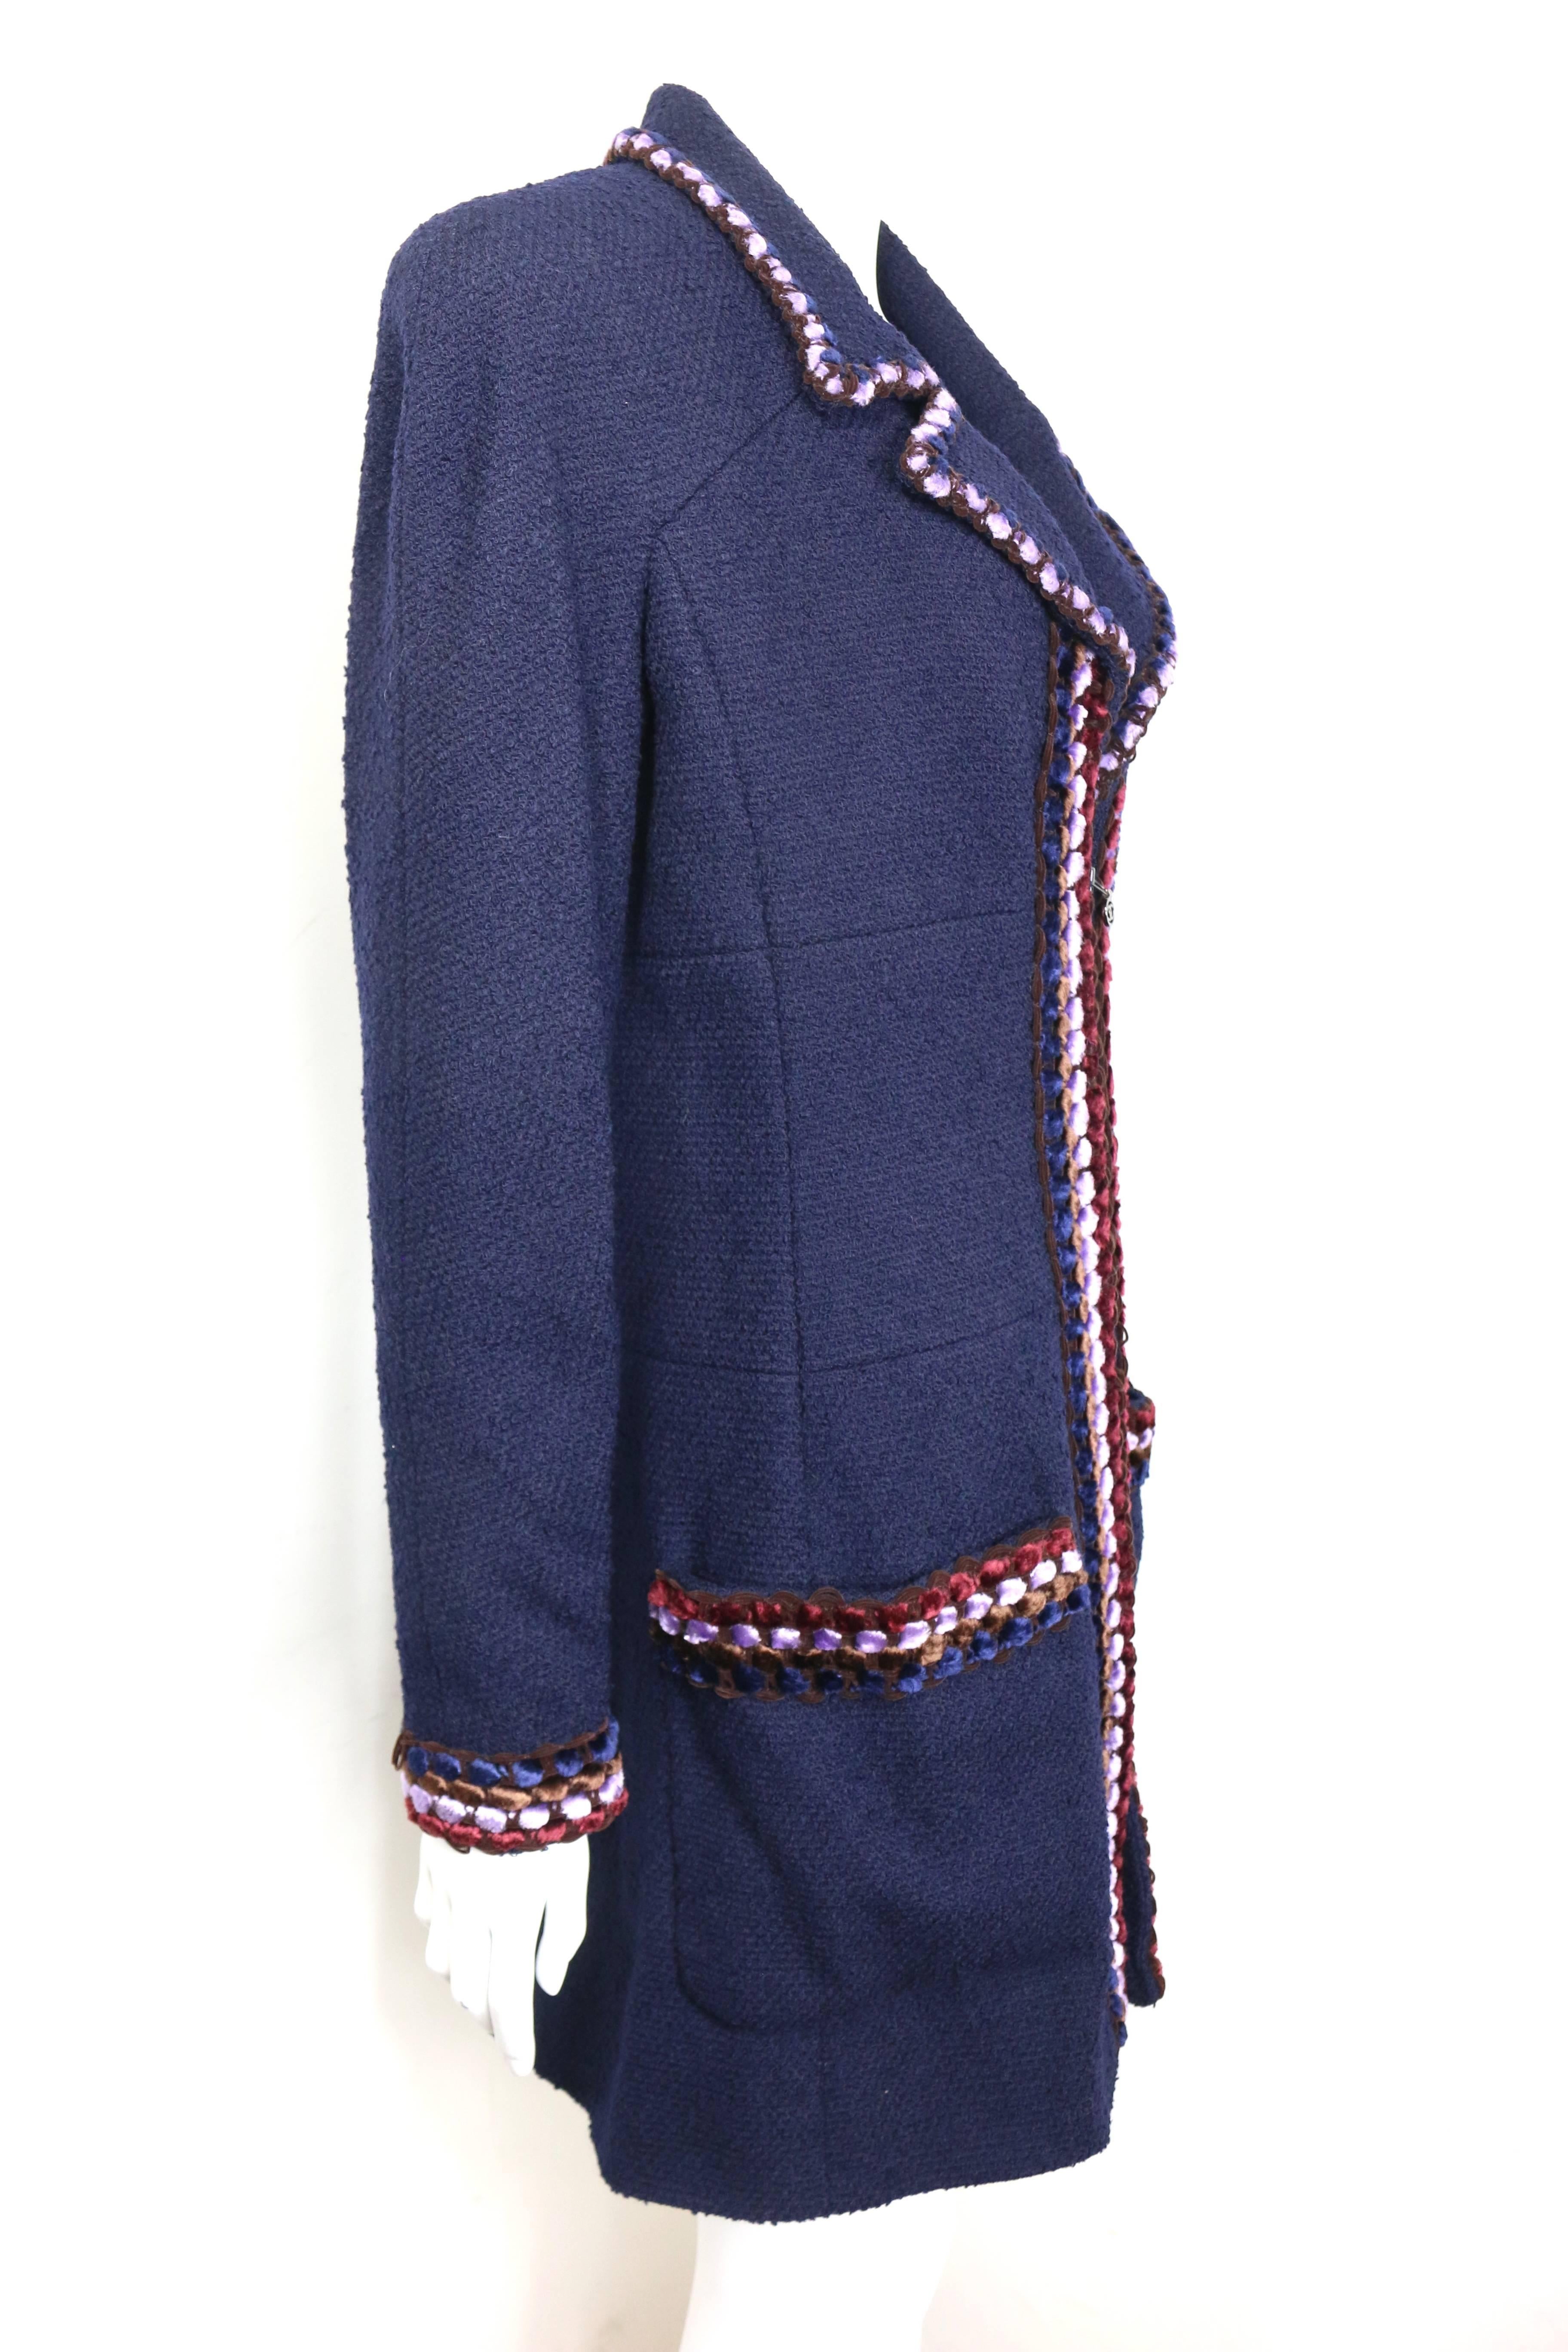 - Chanel navy blue Paris Chenille pom bouclé wool tweed coat from fall 1997 collection.   

-  